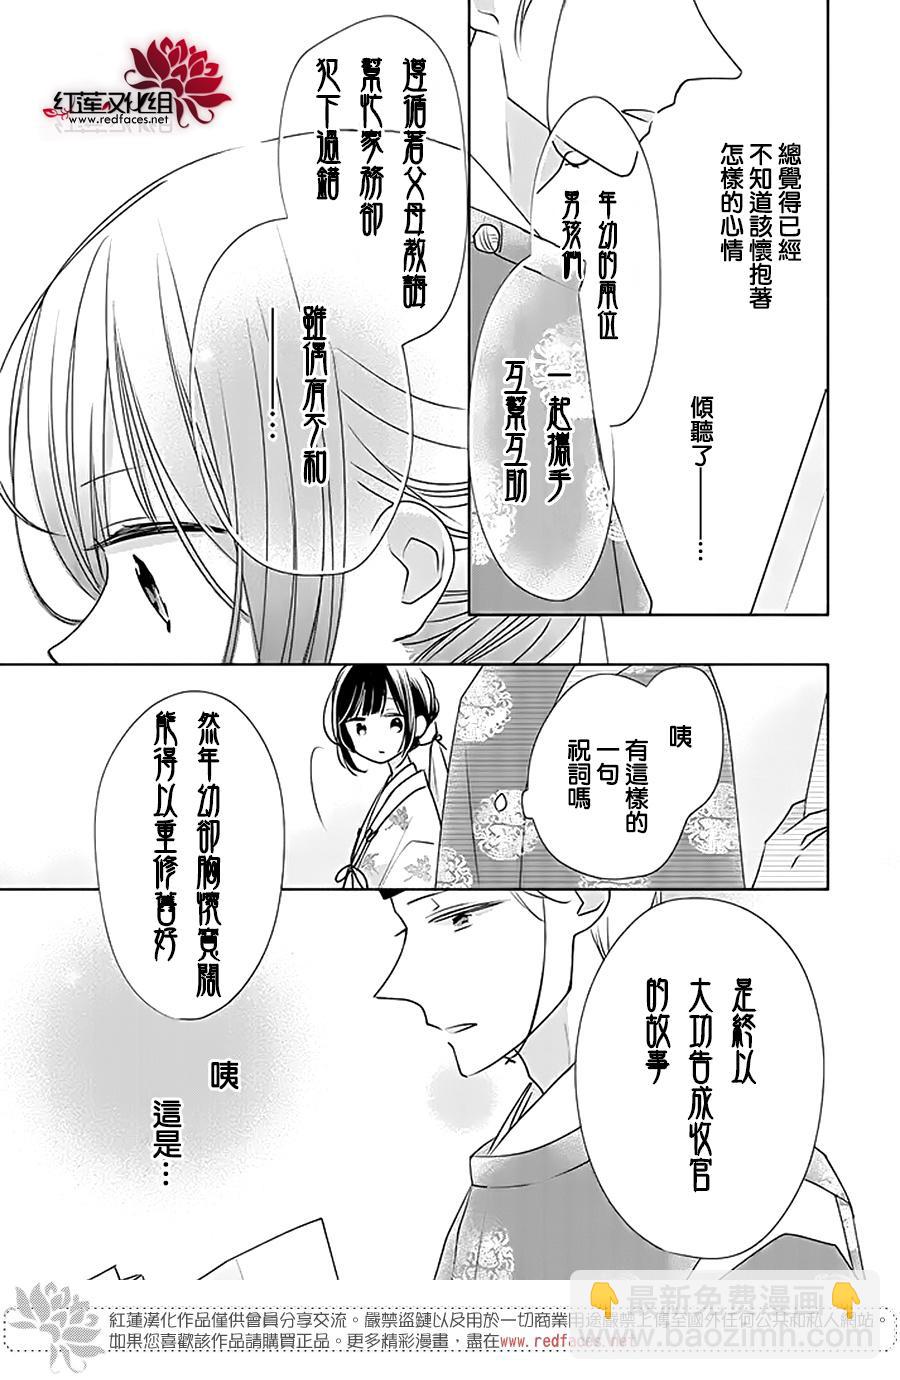 If given a second chance - 28話 - 1